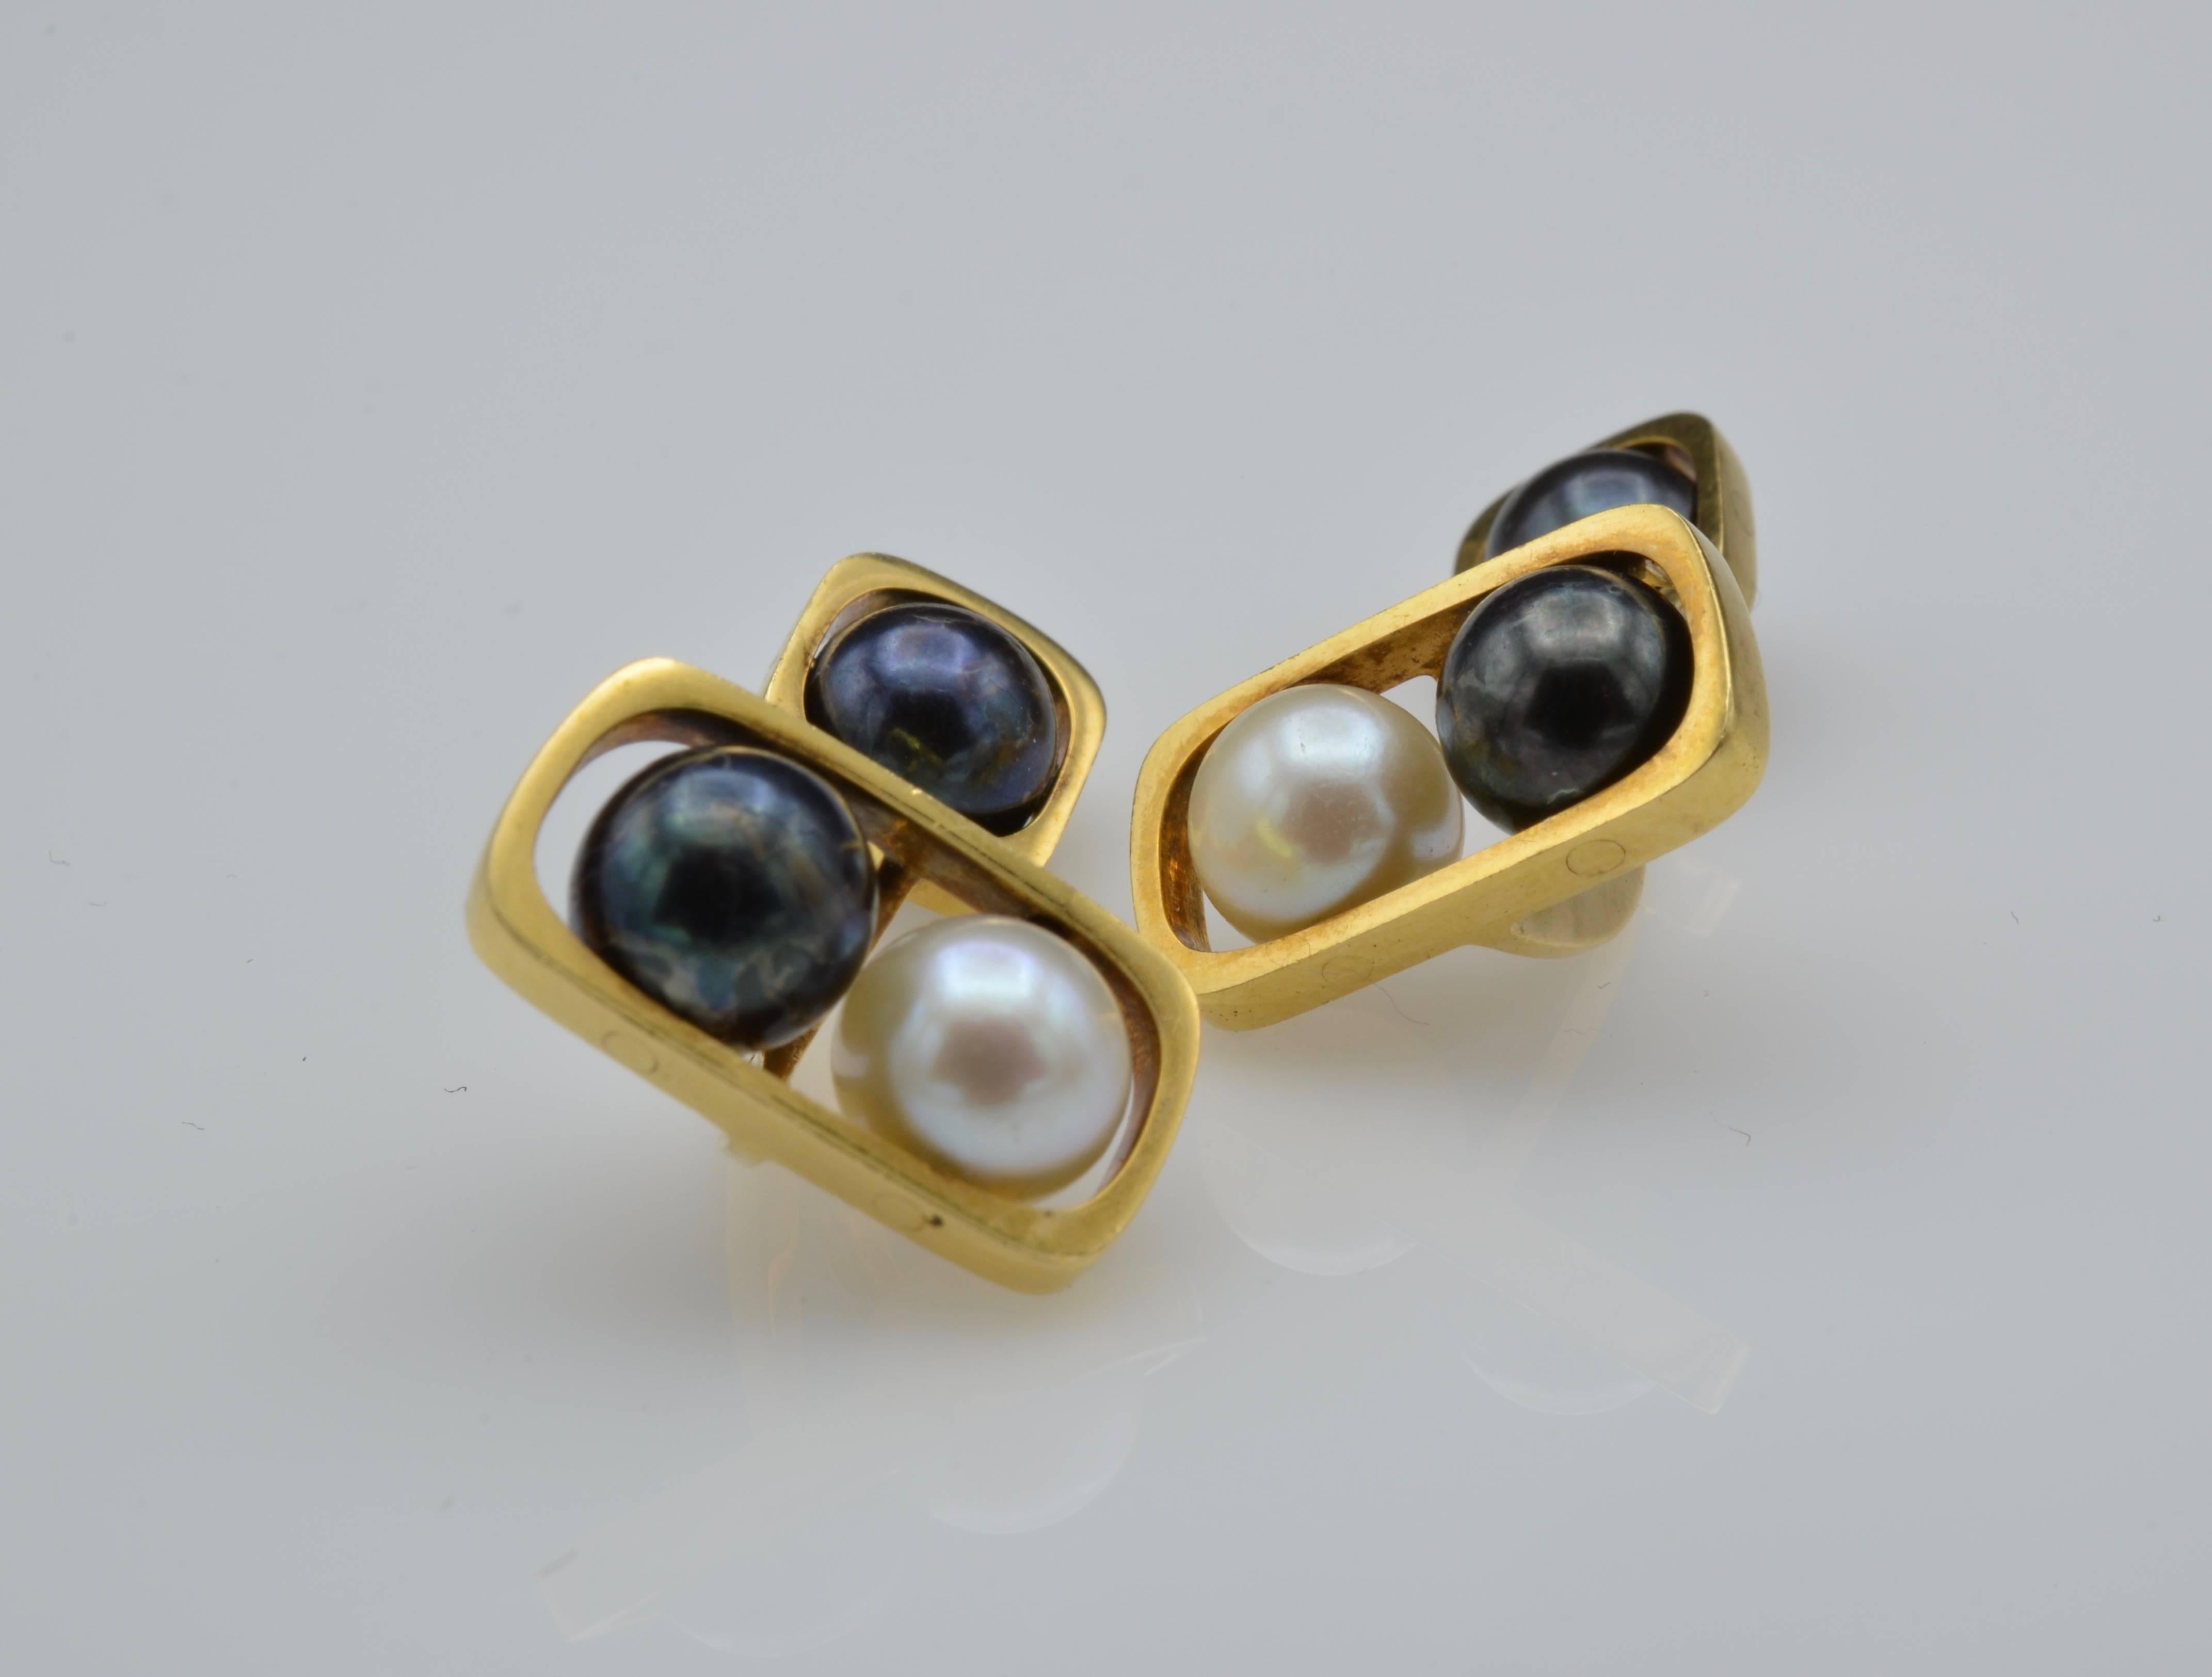 These handsome pearl and gold cufflinks and beautifully designed with white and black pearls suspended from an 18k gold modern framework. The pearls spin and create a stunning accent to any cuff.
These are very unusual and would make a very special